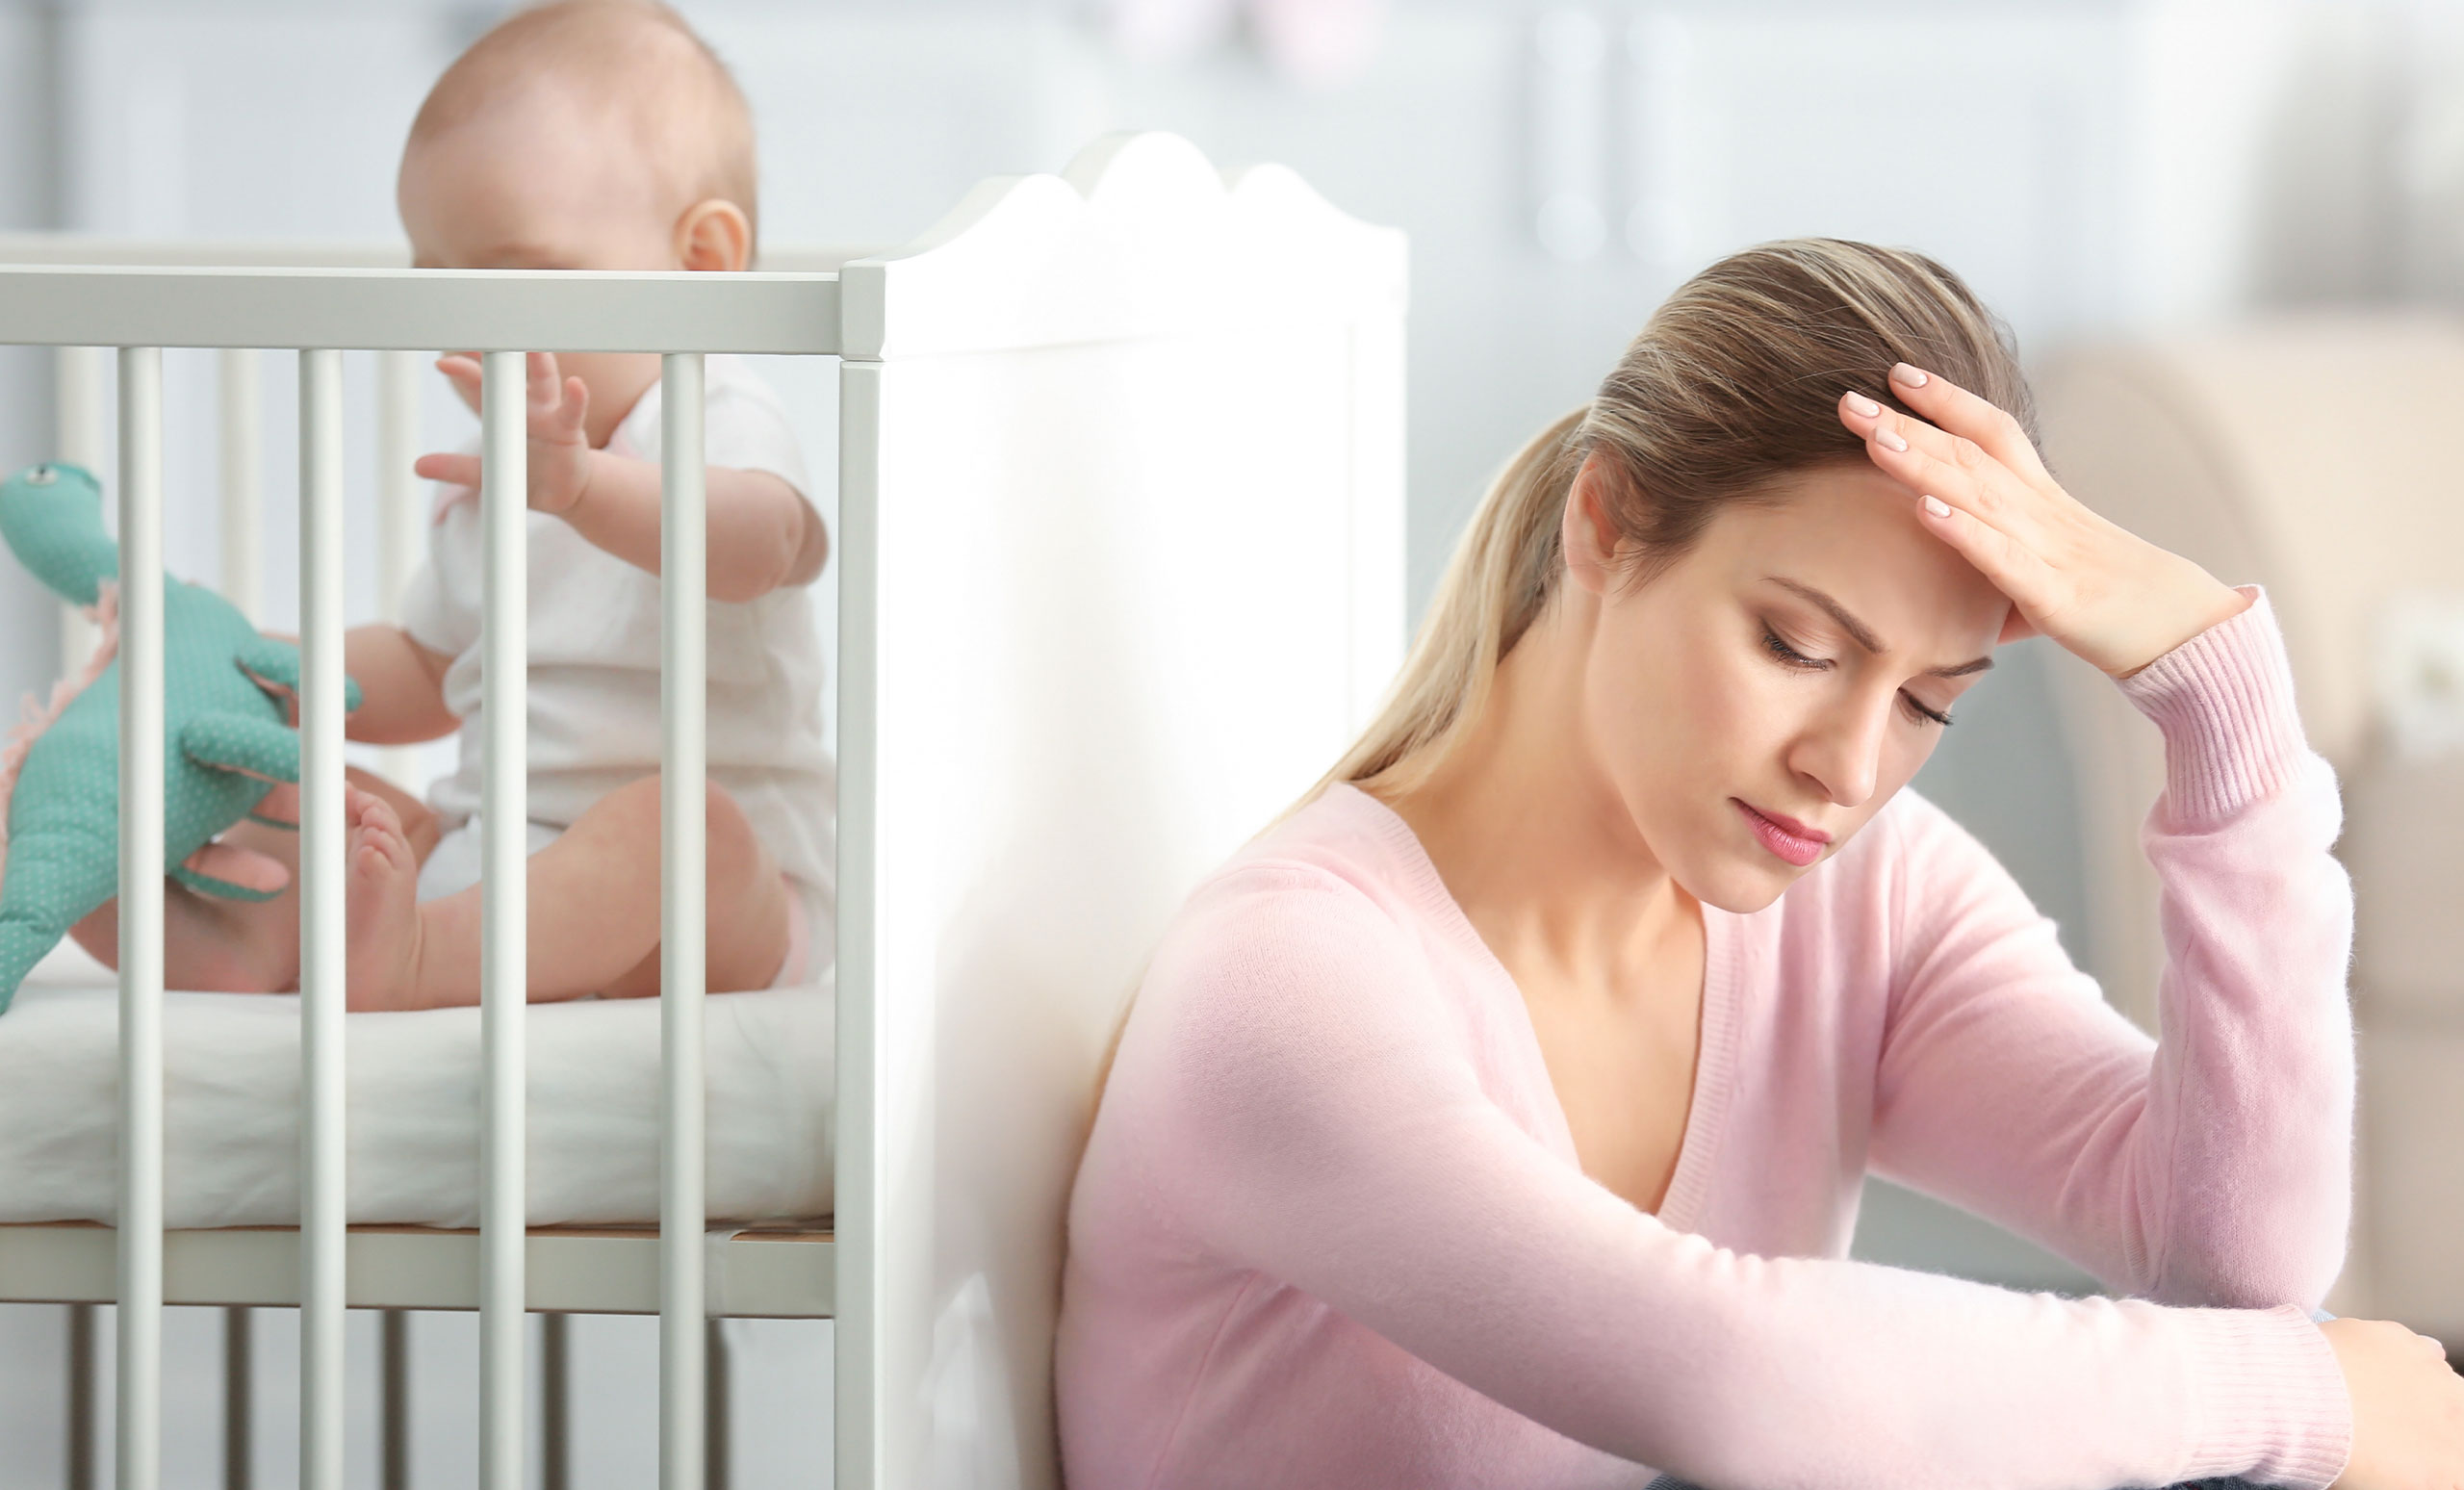 Birth-Related Post-Traumatic Stress Disorder